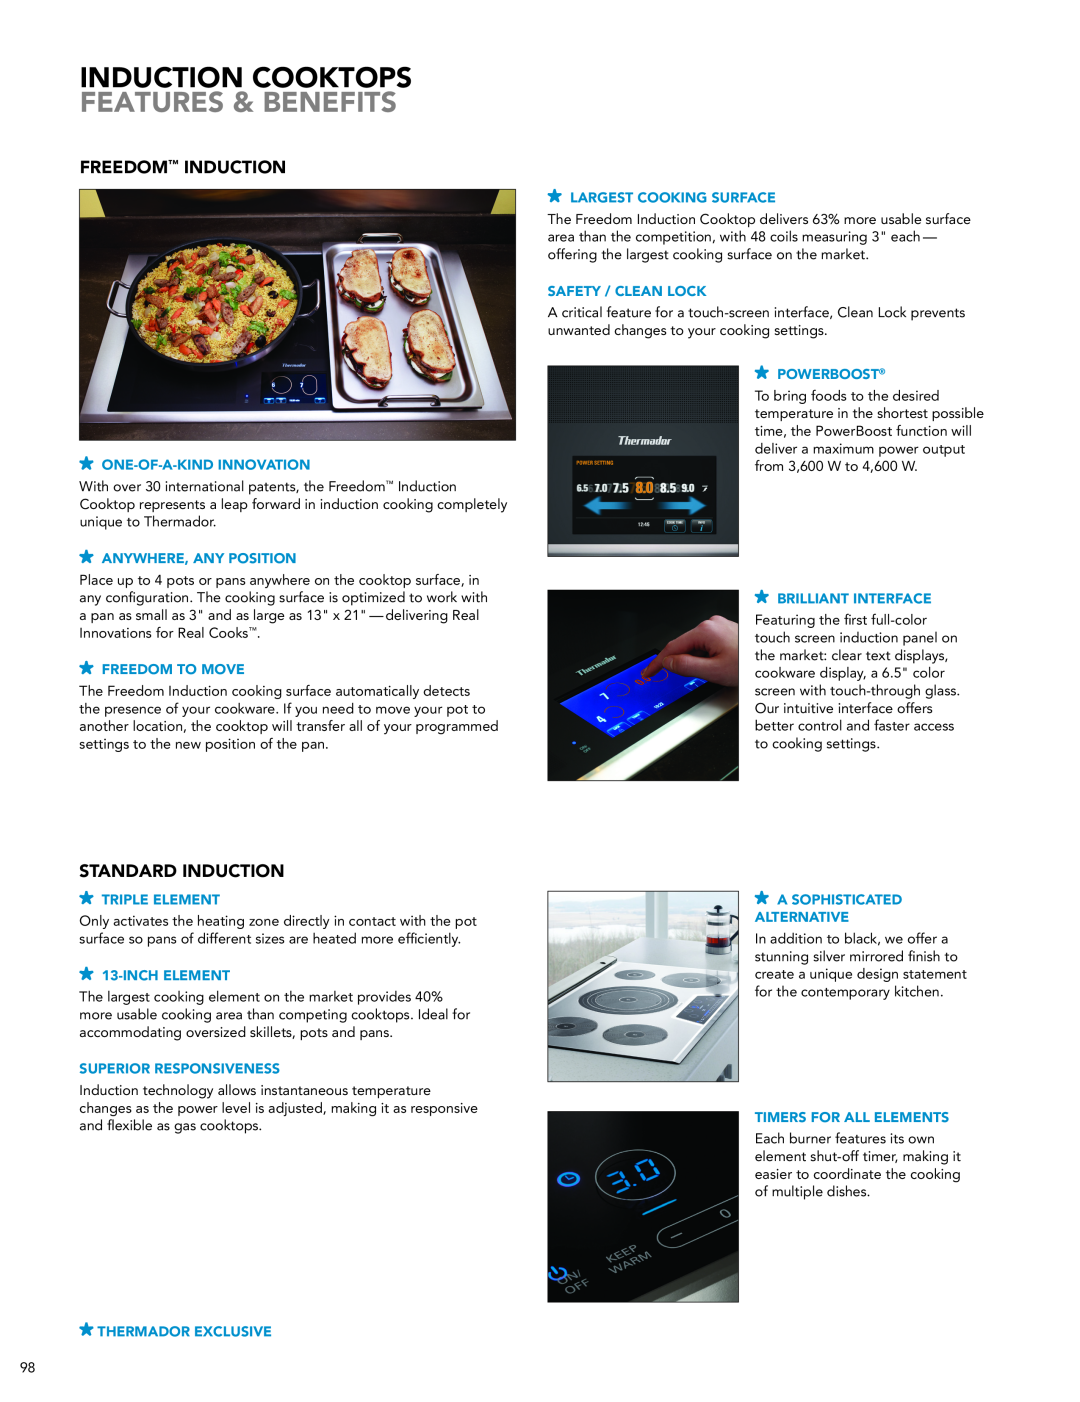 Thermador CIT36XKB Induction Cooktops Features & Benefits, Freedom Induction, Standard Induction, One-Of-A-Kindinnovation 